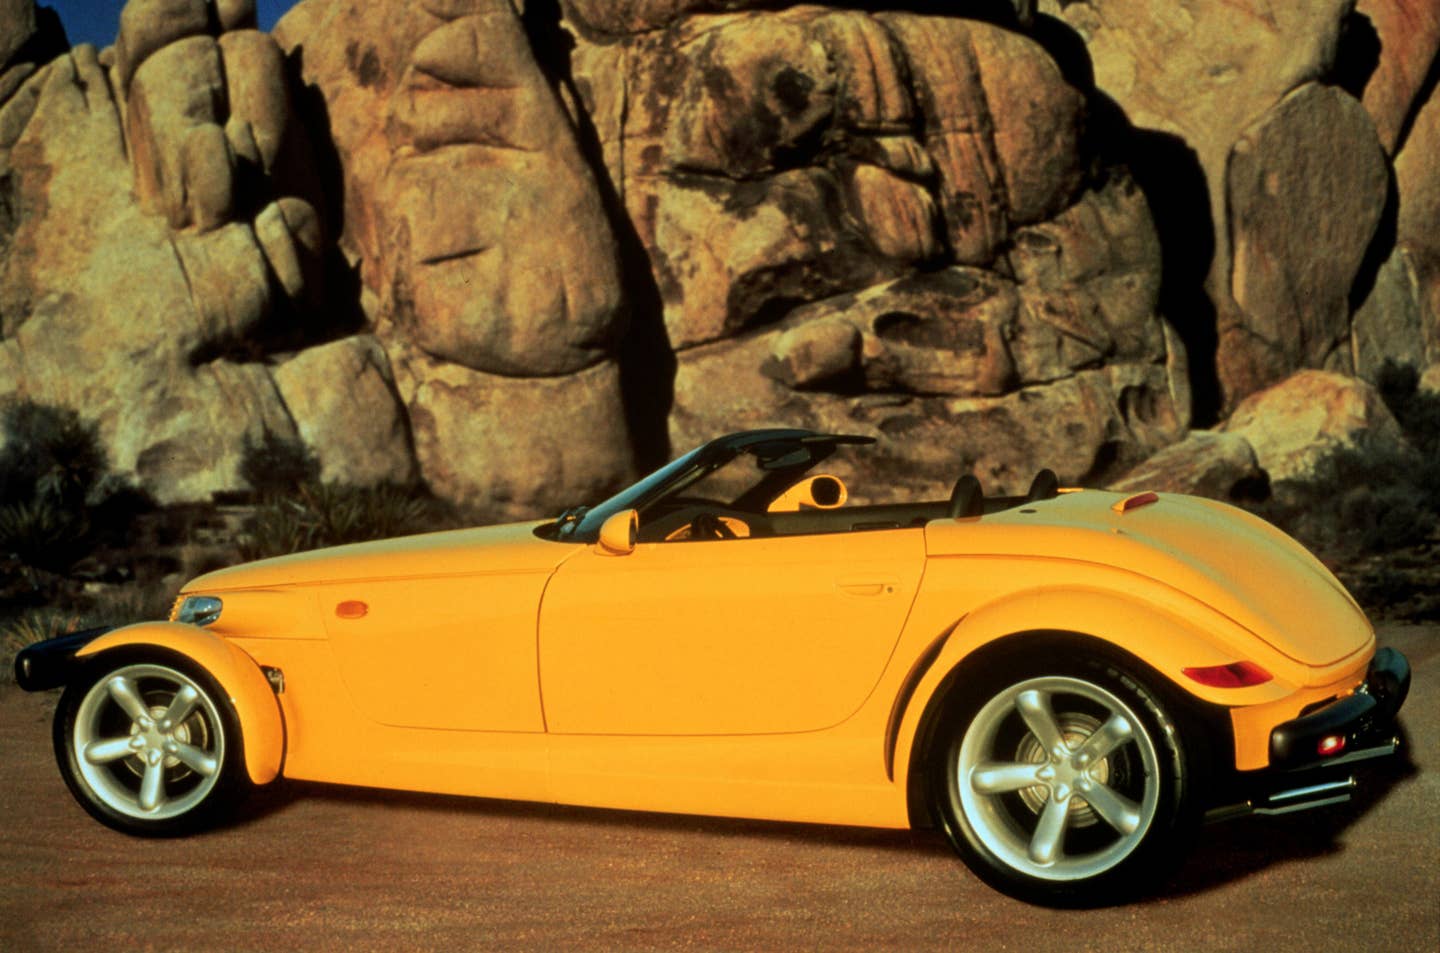 1999 Plymouth Prowler. PP-903.